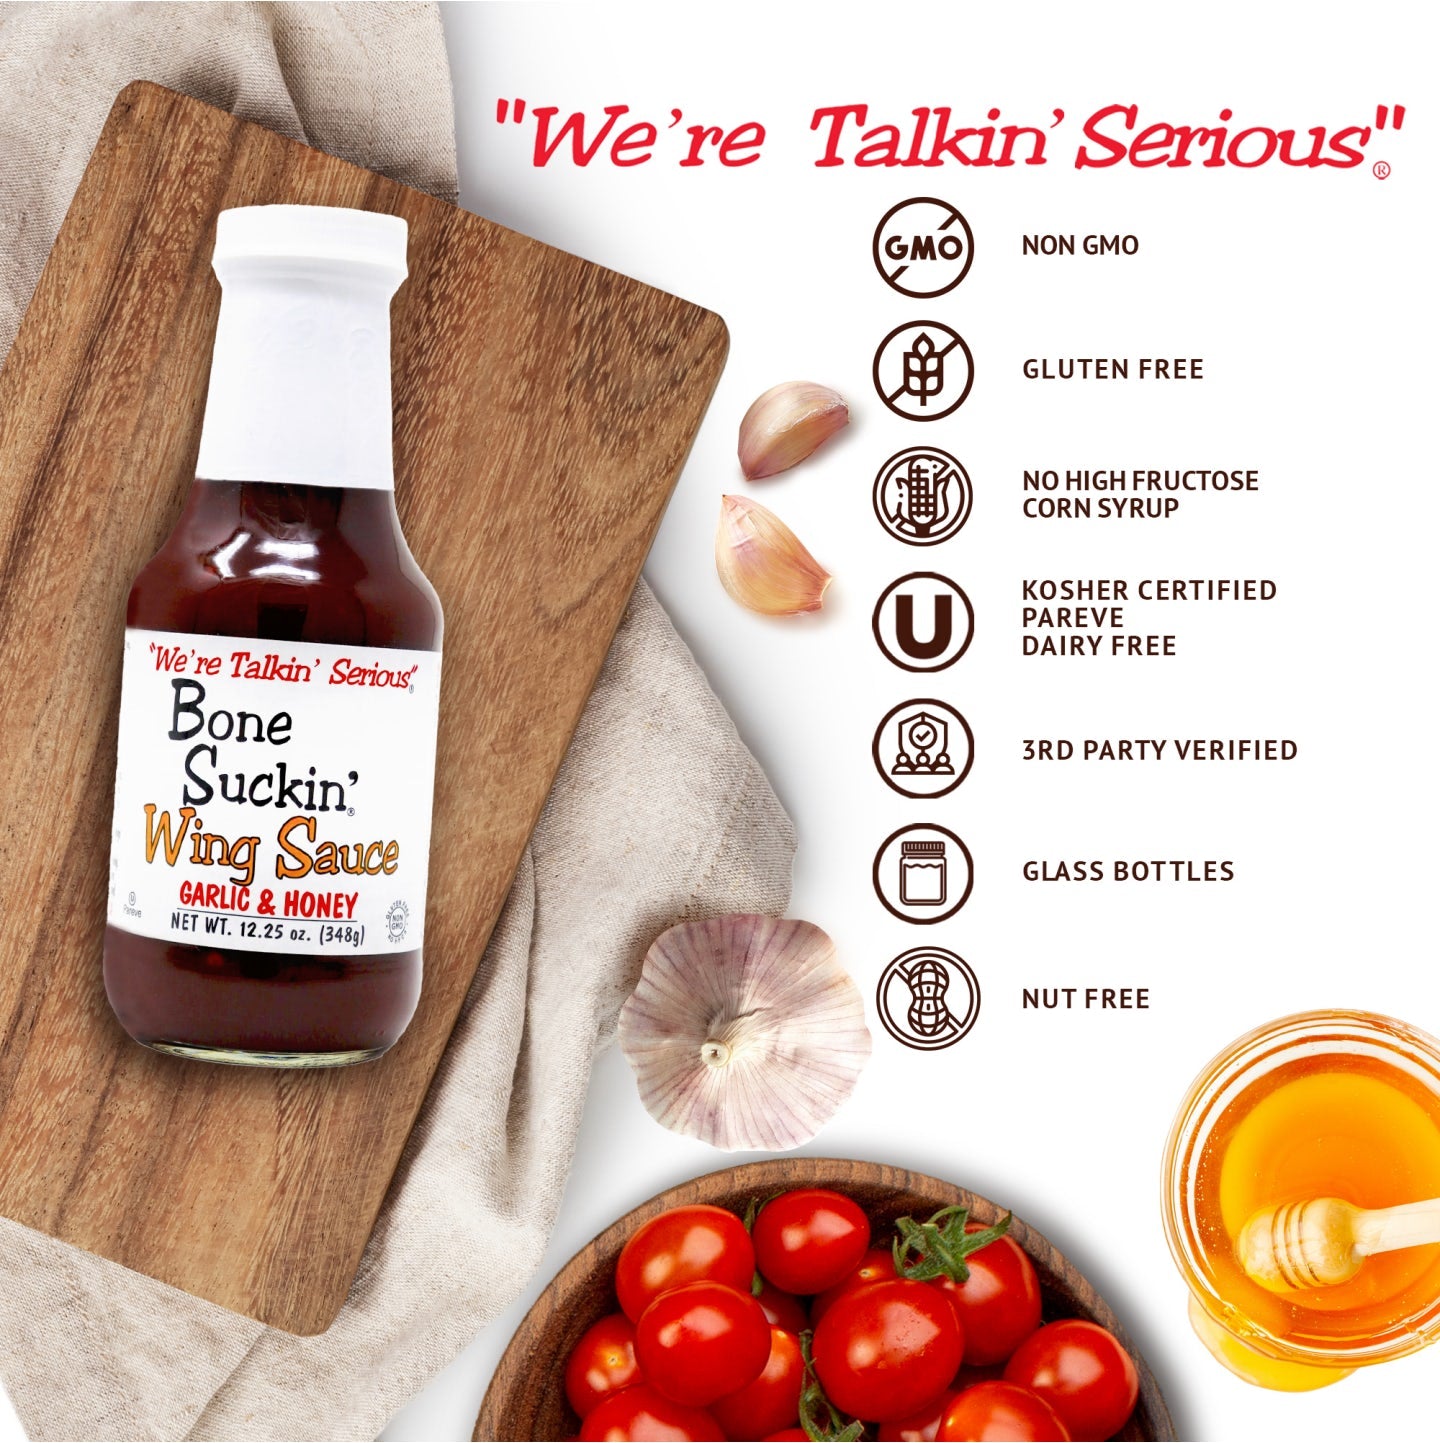 Bone Suckin' Sauce Garlic & Honey Wing Sauce is NON-GMO, Gluten Free, No high fructose corn syrup, kosher, pareve dairy free, 3rd party verified, glass bottles, and nut free.